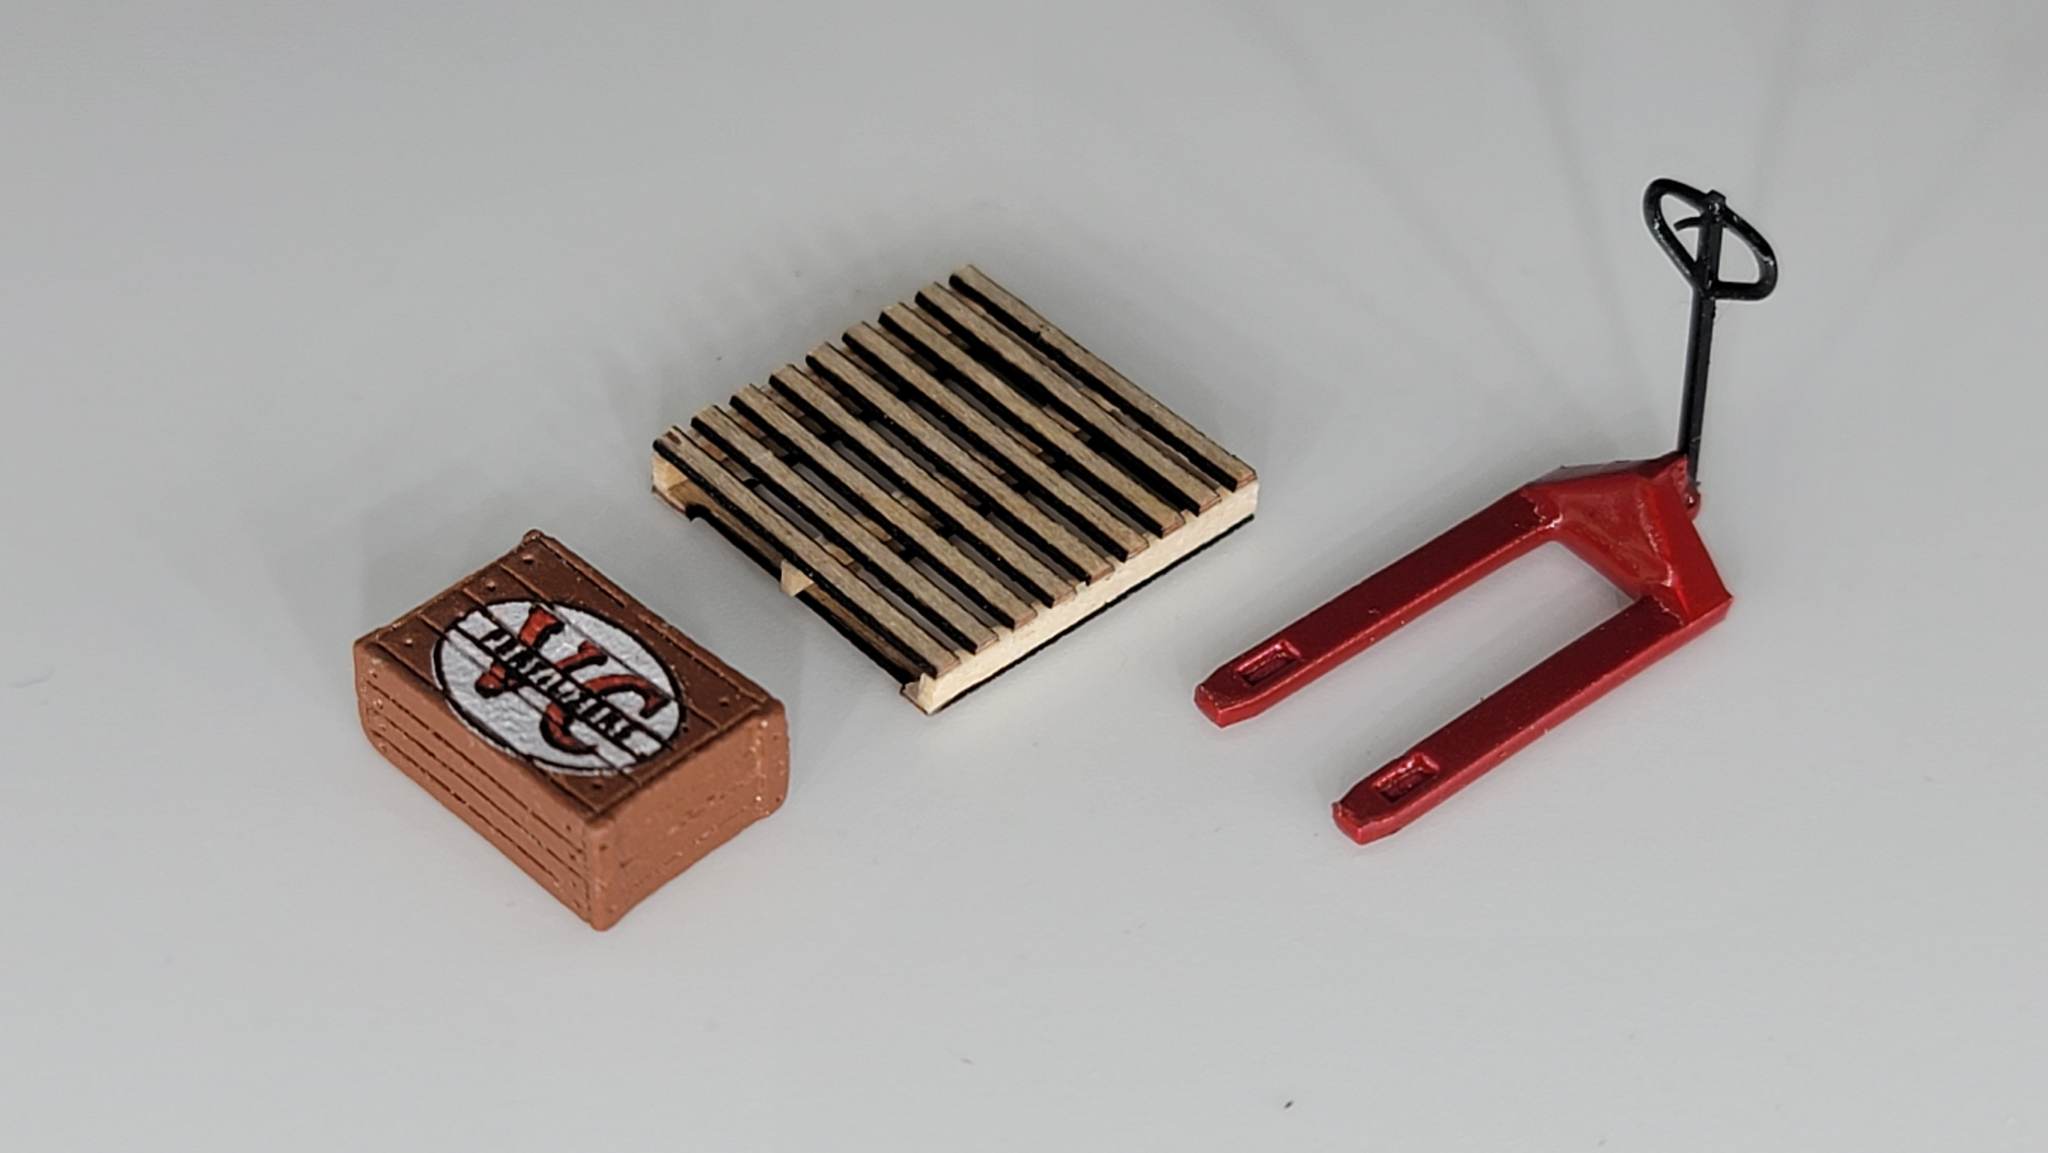 Pallet Jack, Pallet and Crate (HO Scale)